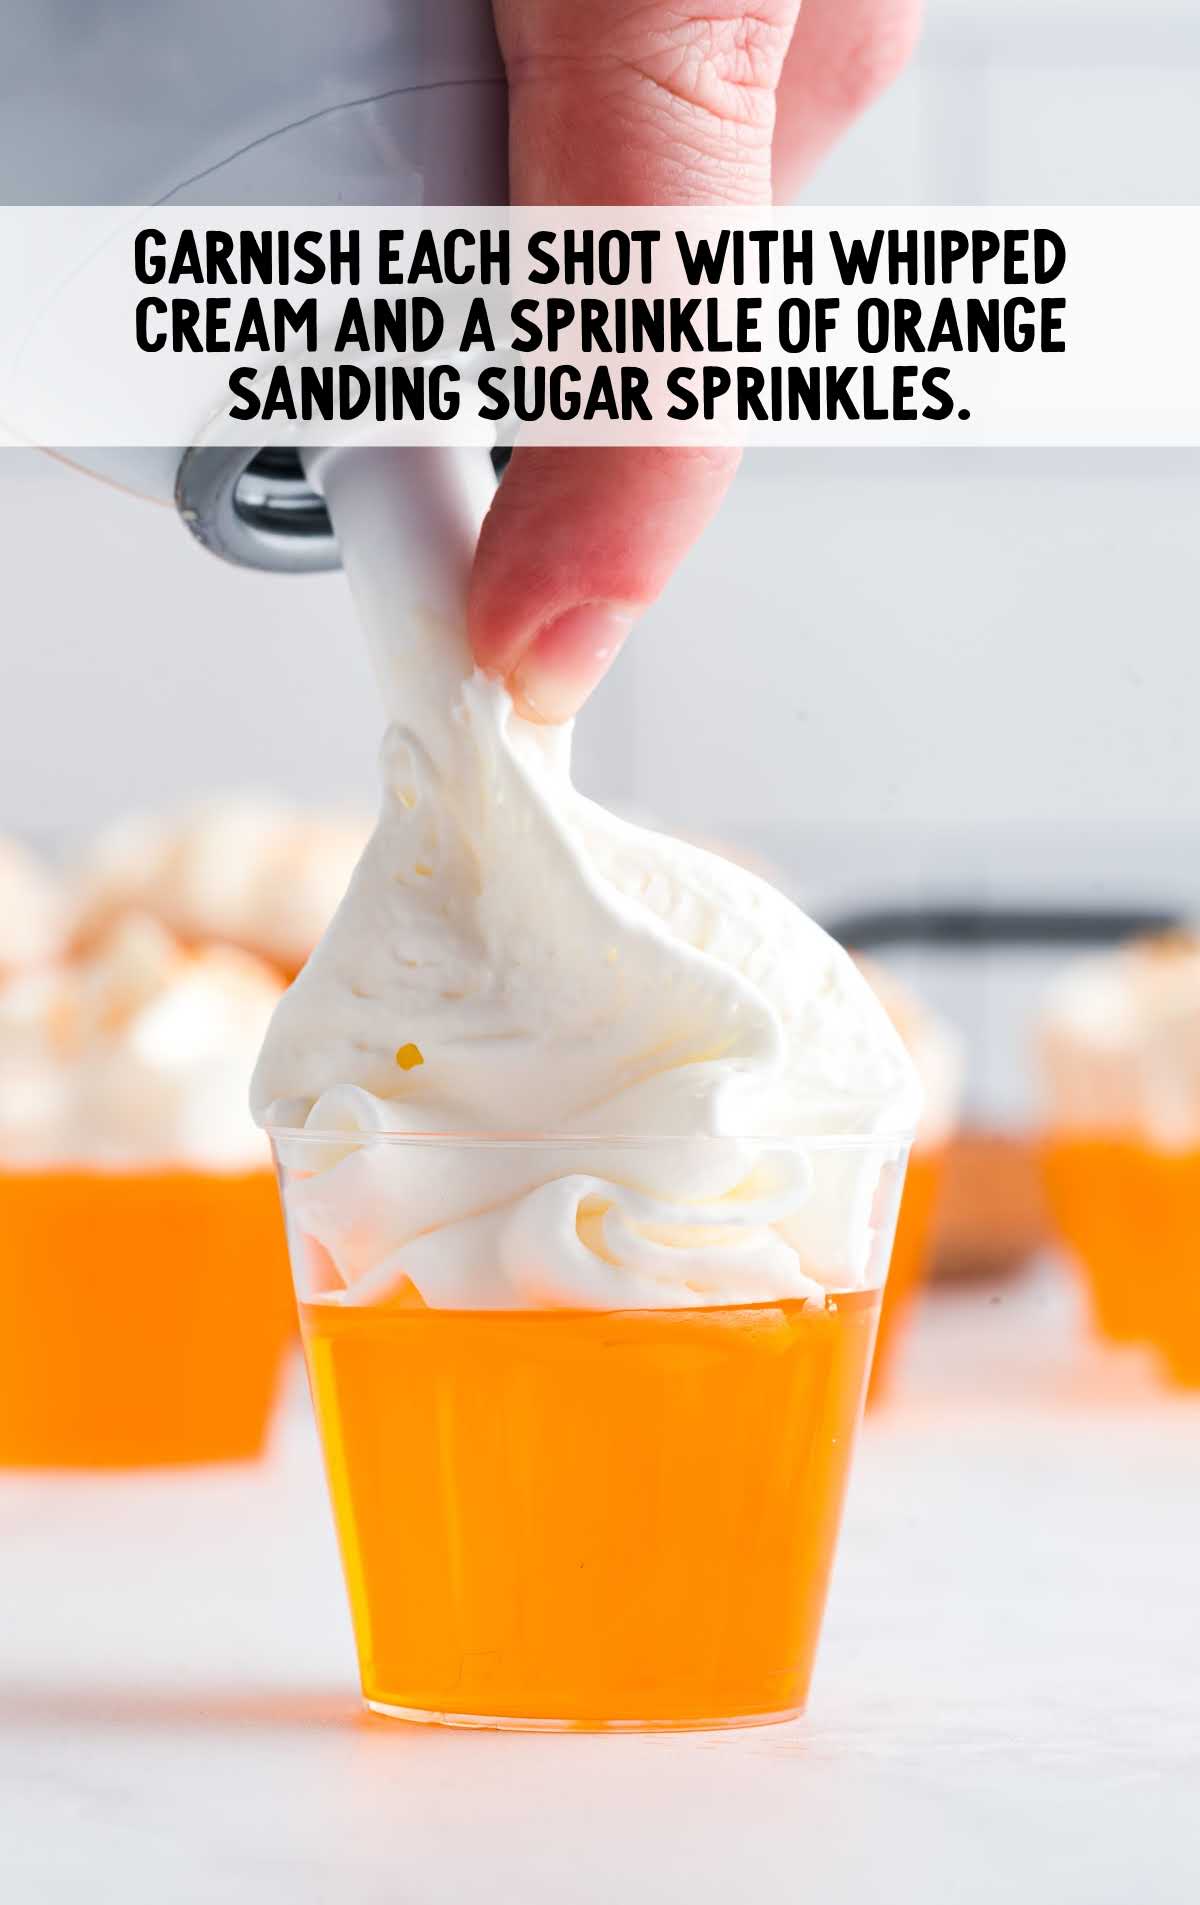 whipped cream and garnished with orange sprinkles